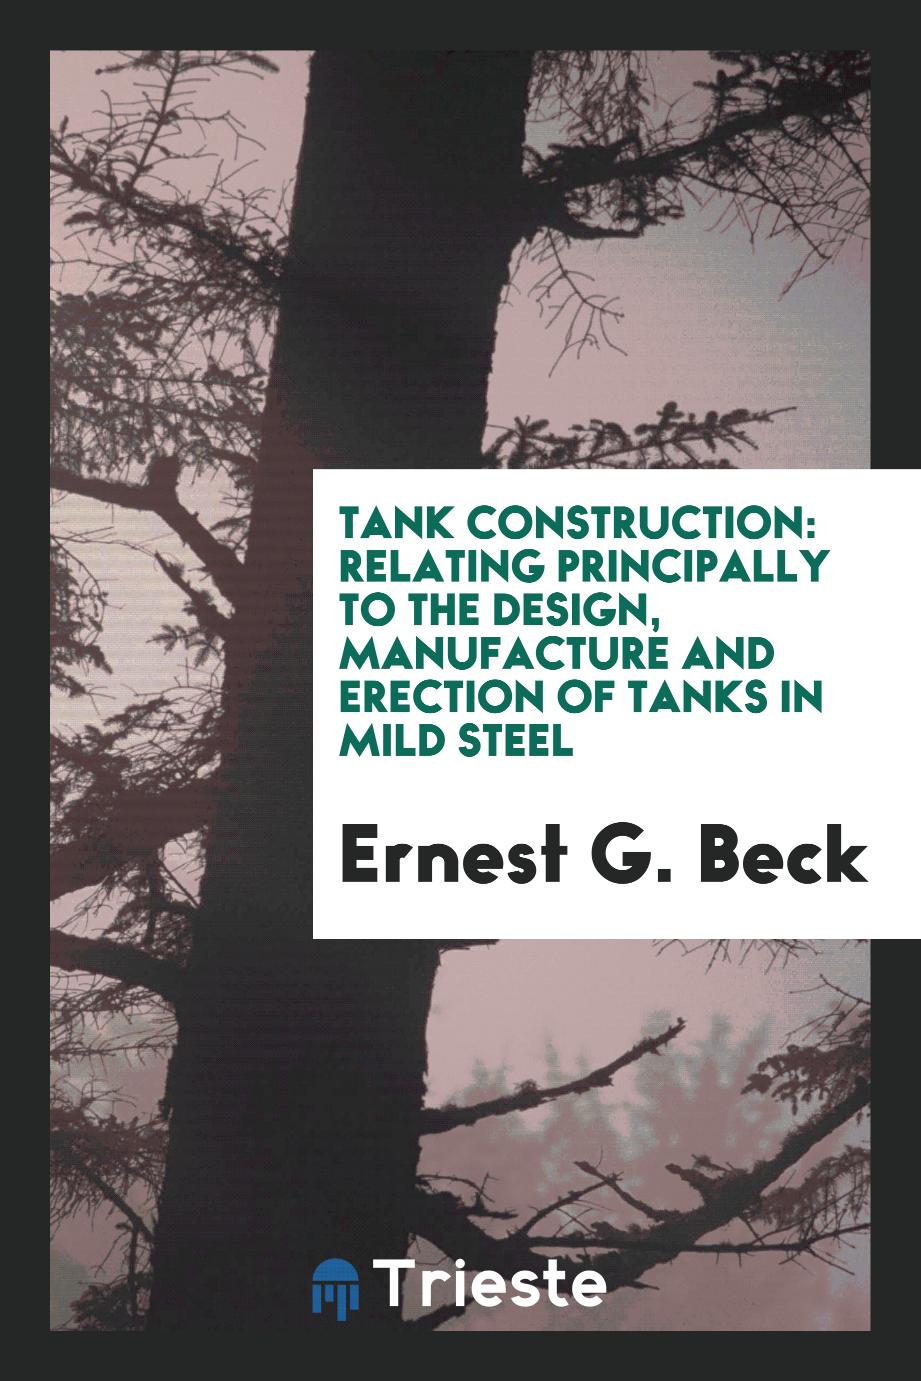 Tank construction: relating principally to the design, manufacture and erection of tanks in mild steel